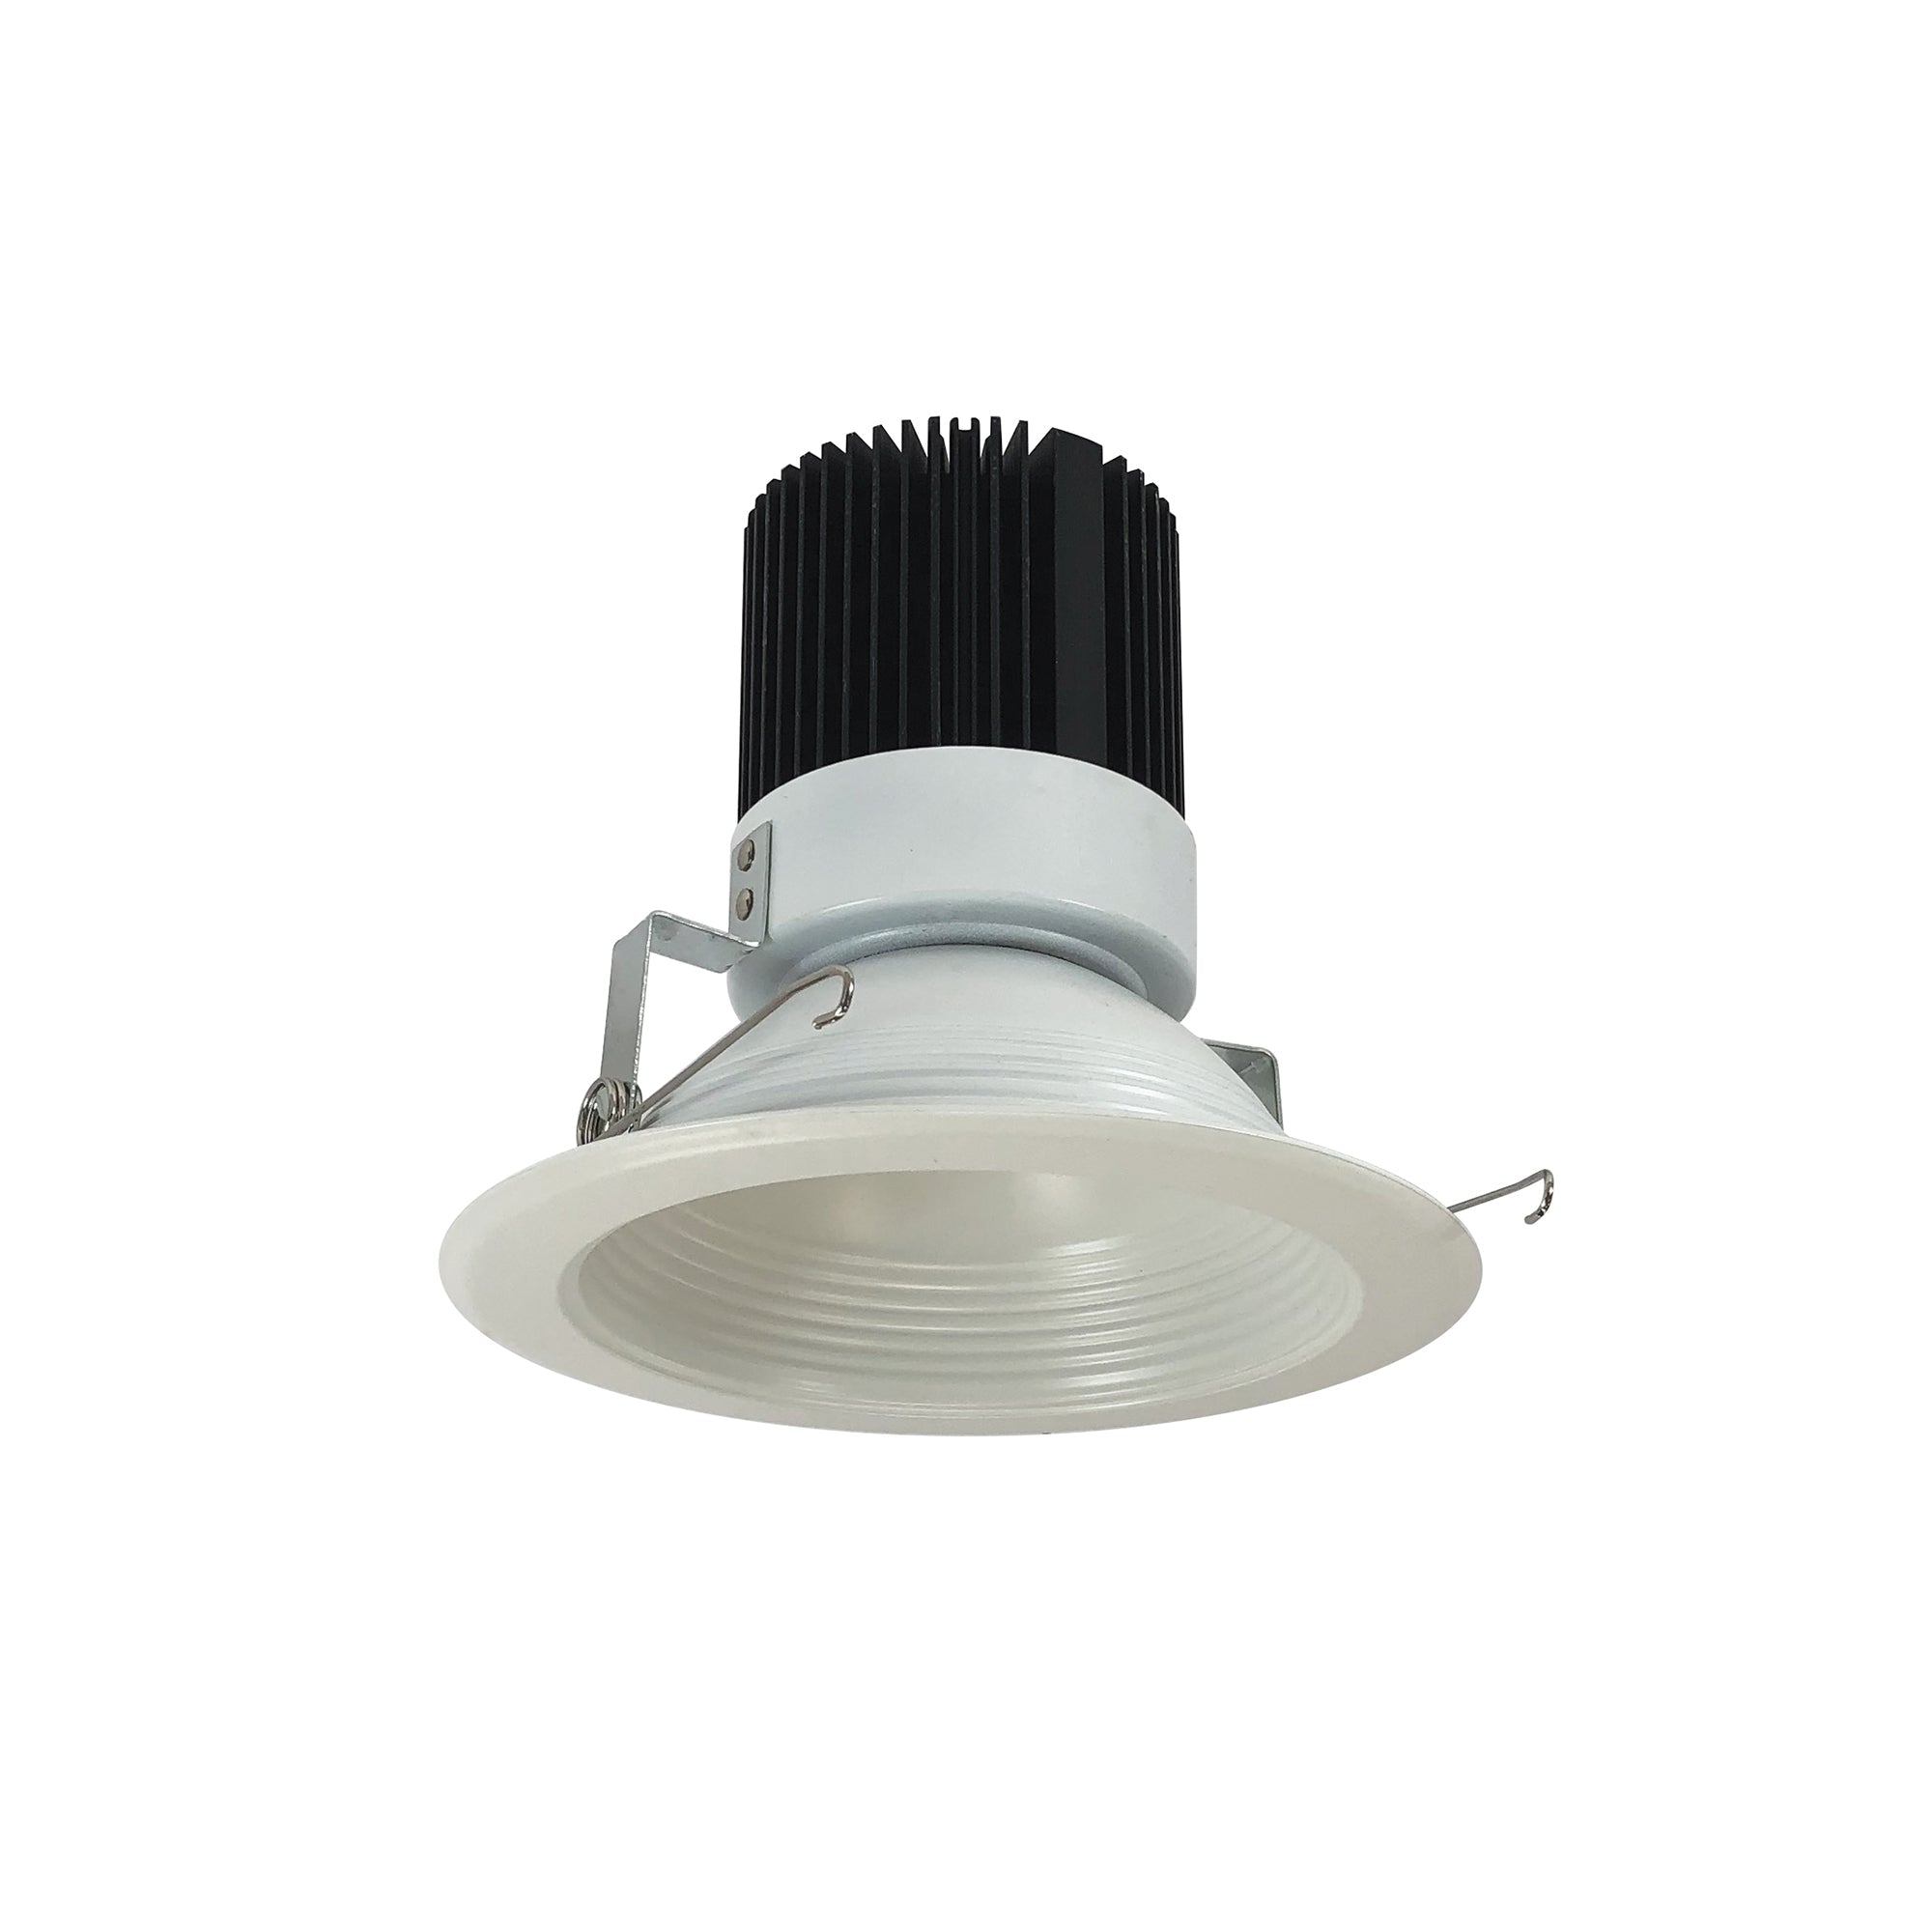 Nora Lighting NRM2-612L2535FMPW - Recessed - 6 Inch Marquise II Round Baffle, Flood, 2500lm, 3500K, Matte Powder White (Available with Non-IC Housings Only)